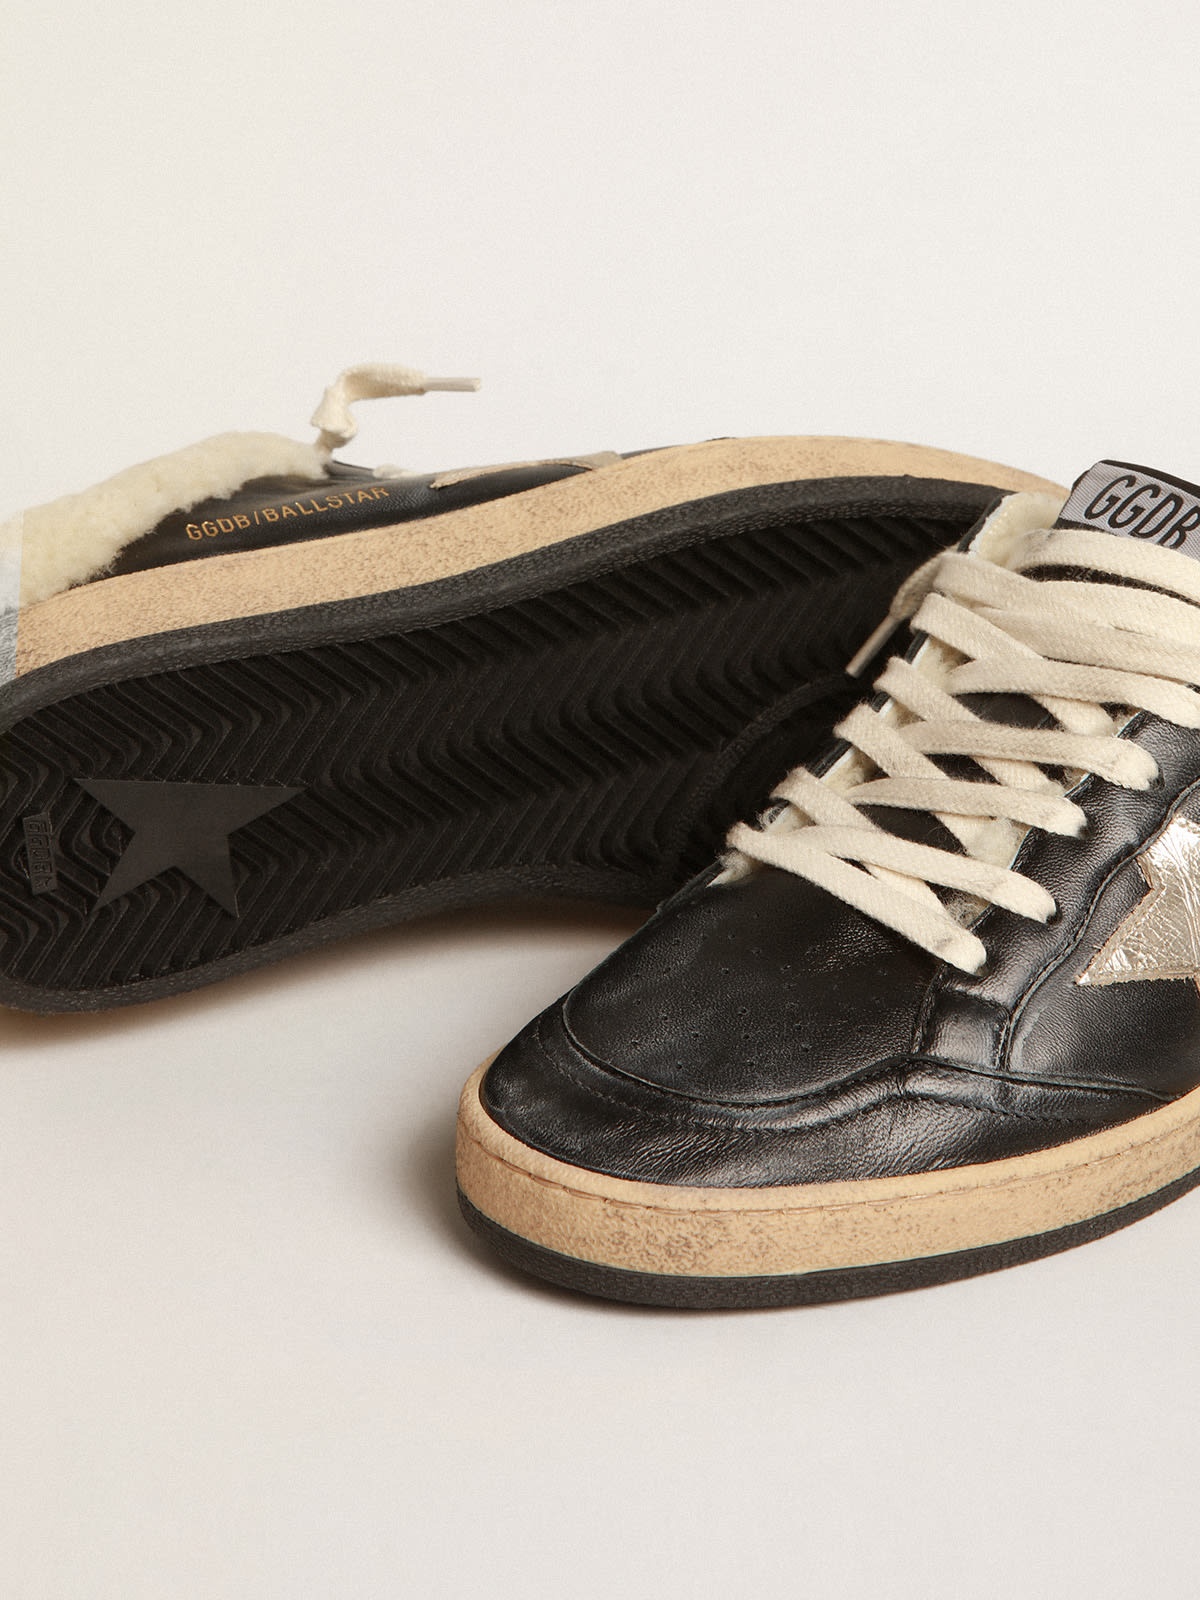 Golden Goose Ball Star Sabots in nappa with platinum star and shearling  lining | REVERSIBLE